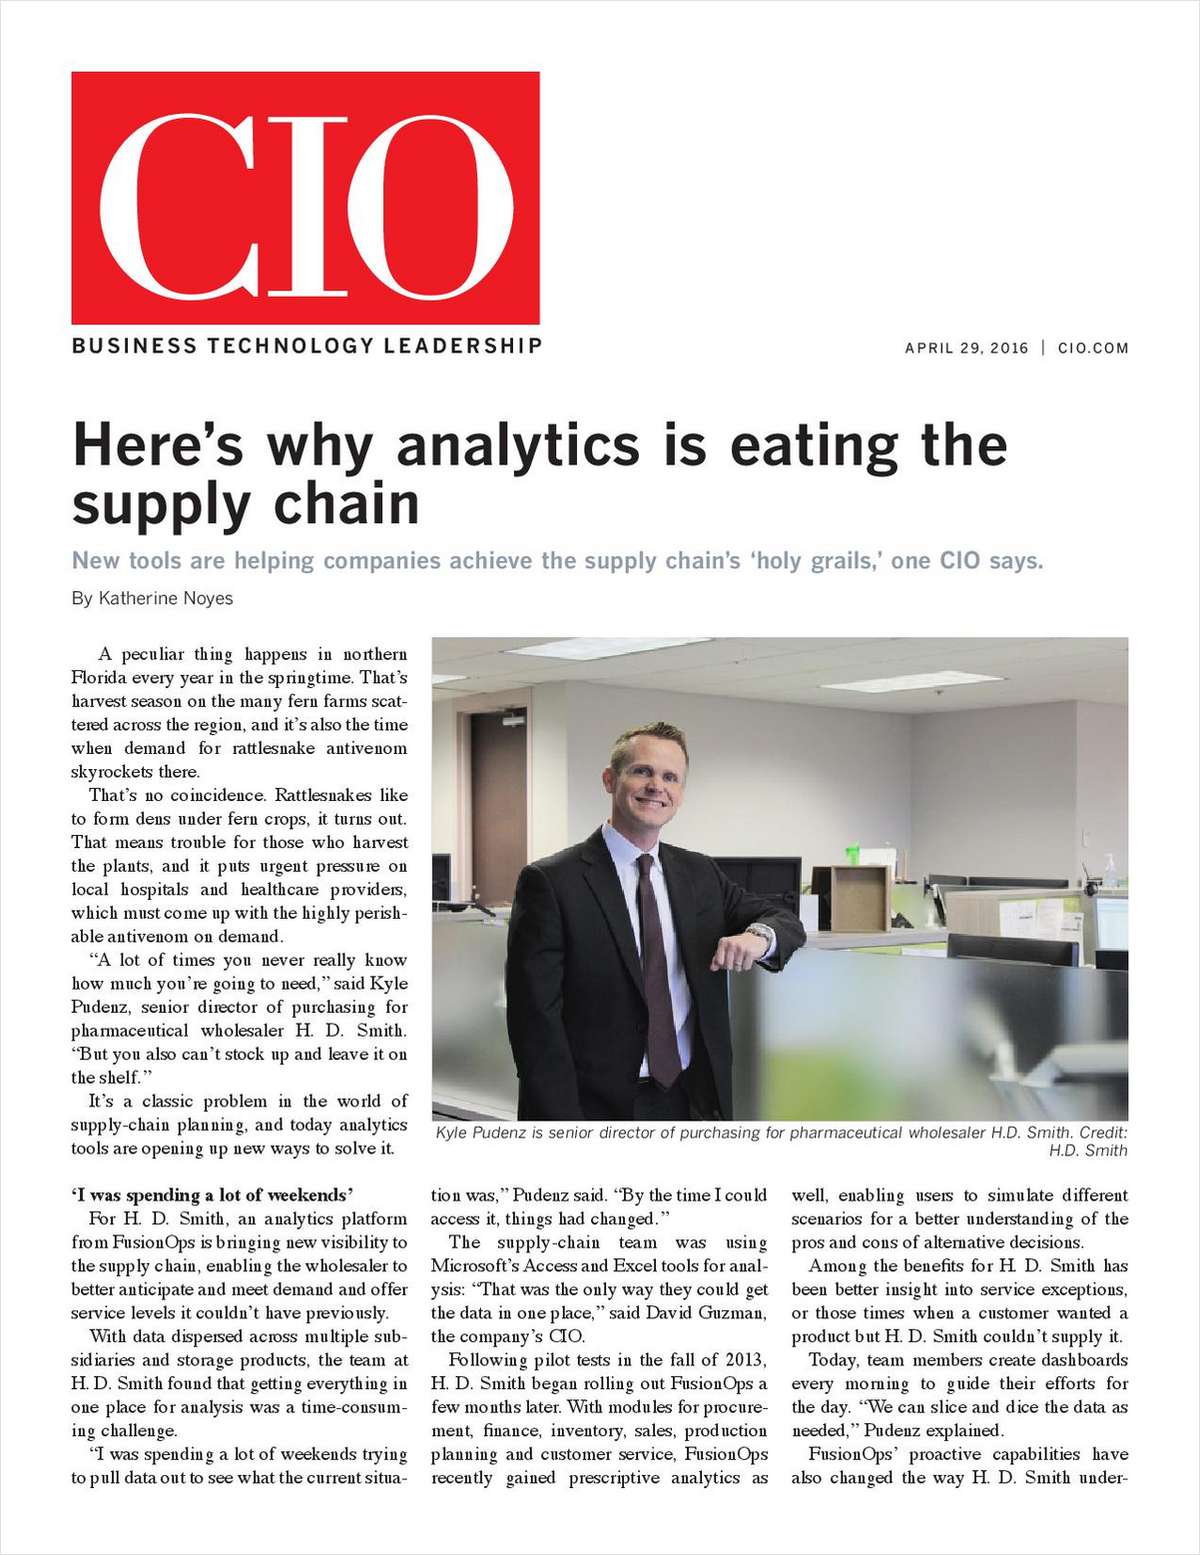 CIO: Here's Why Analytics is Eating the Supply Chain